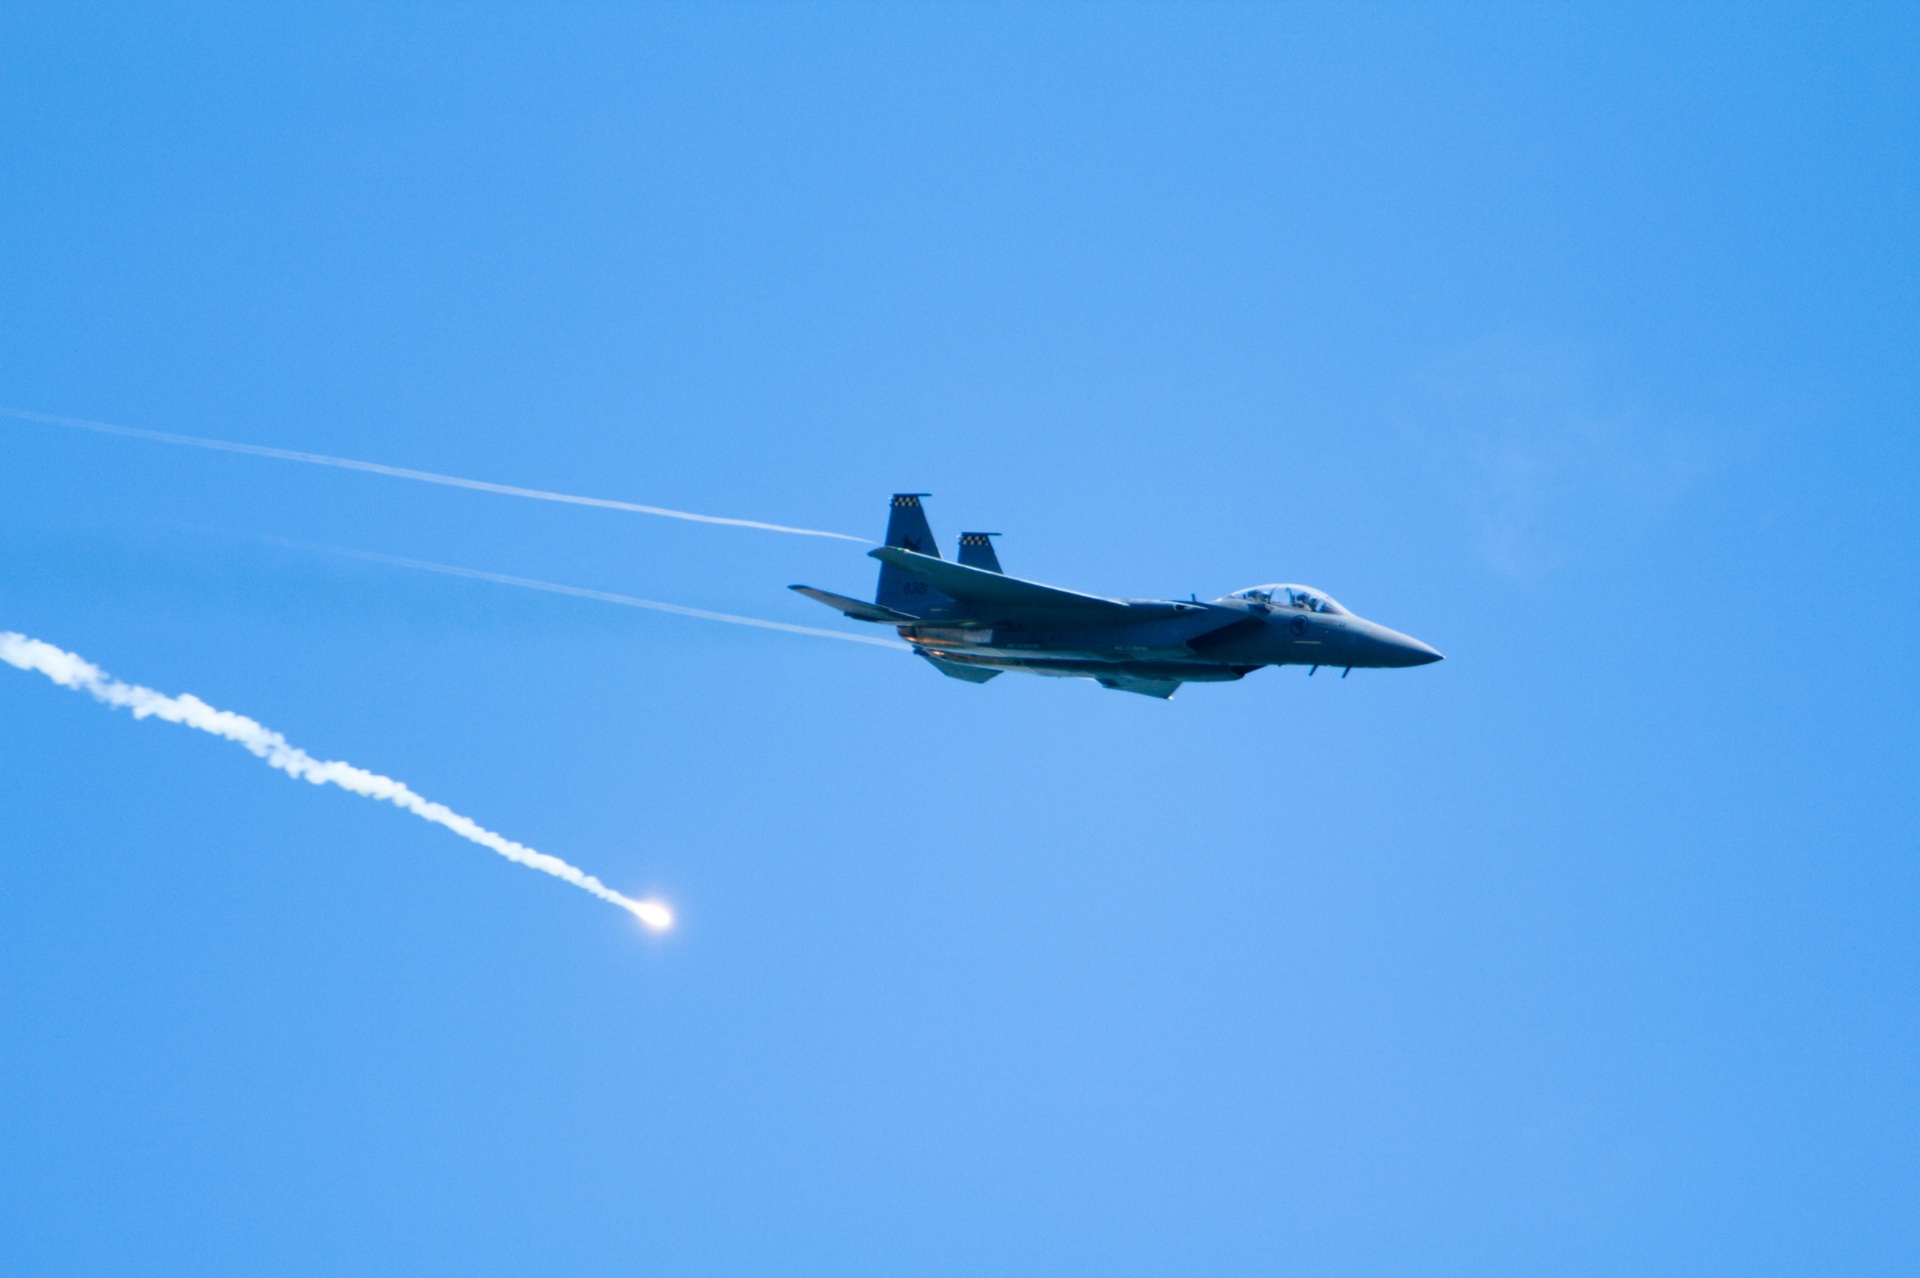 A RSAF F-15 releases a flare during a flyover for the Singapore Airshow 2020. Photo: Timothy Newman